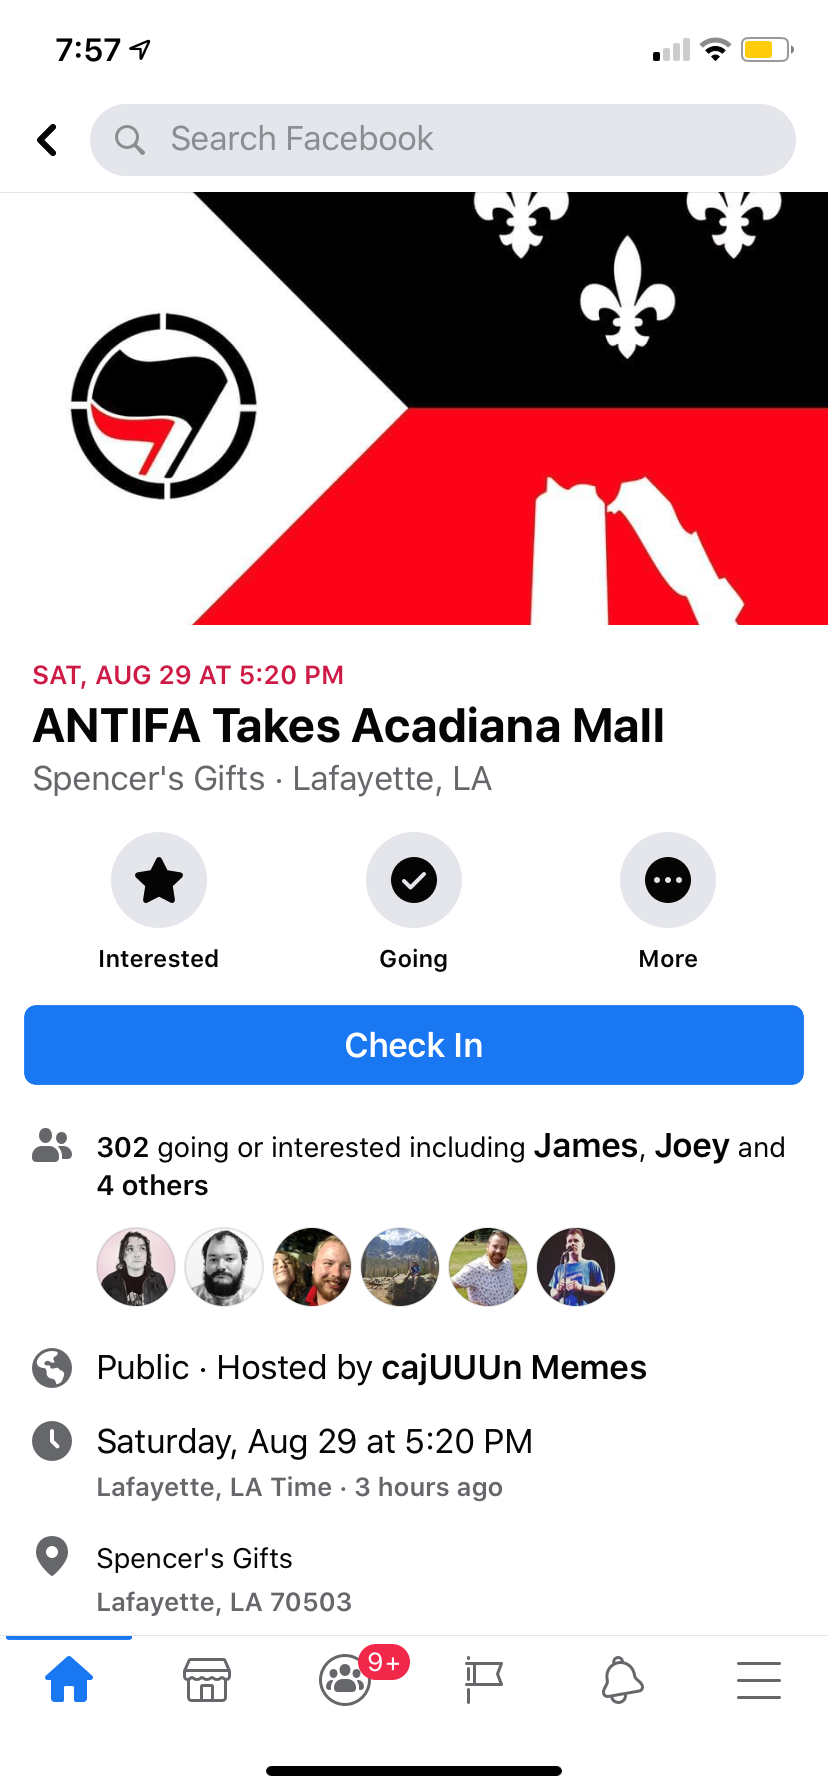 A Facebook event, organized by John Merrifield, noted "ANTIFA Takes Acadiana Mall," a couple of hours before mall security shut stores down and sent customers home.  Merrifield said the event was fake, promoted to bring attention to how police treat minorities.